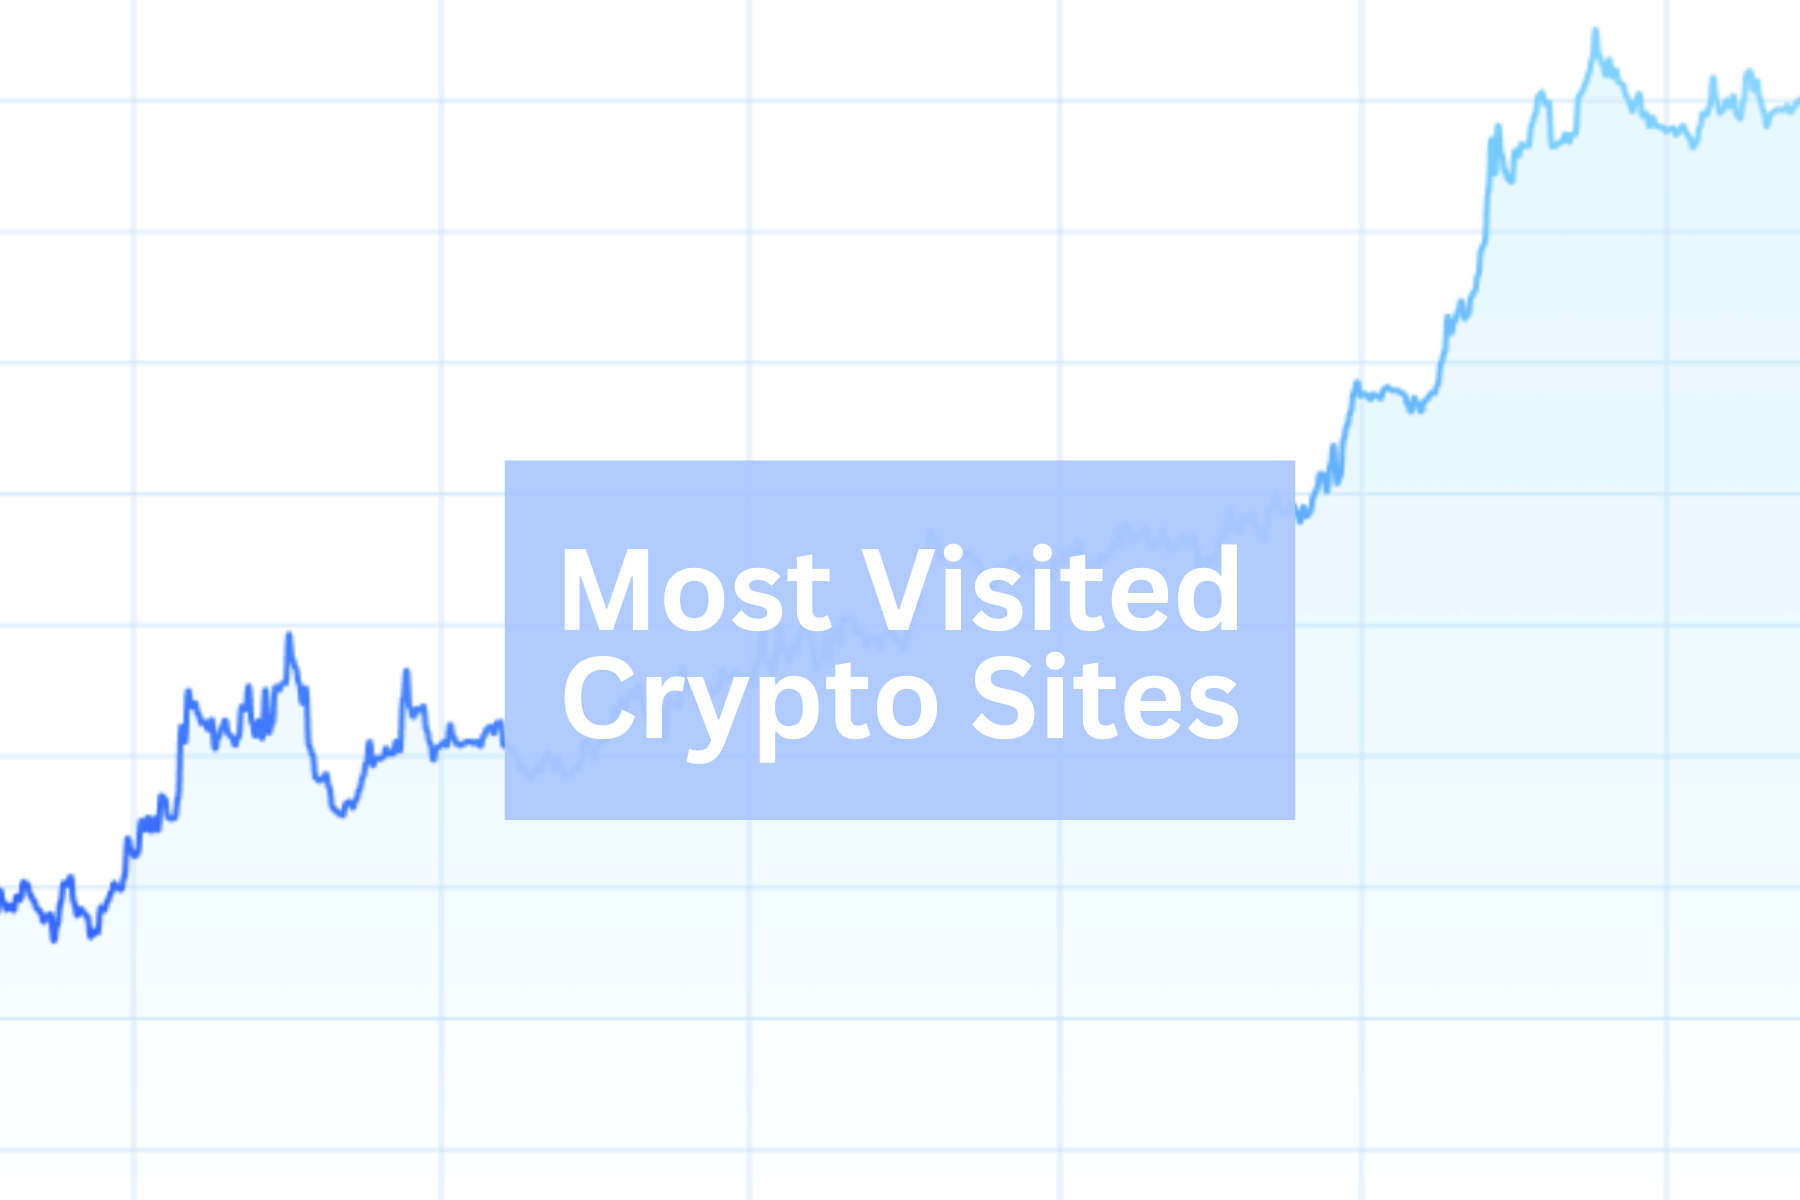 Video Highlight: Most visited crypto websites between 2017 and 2022